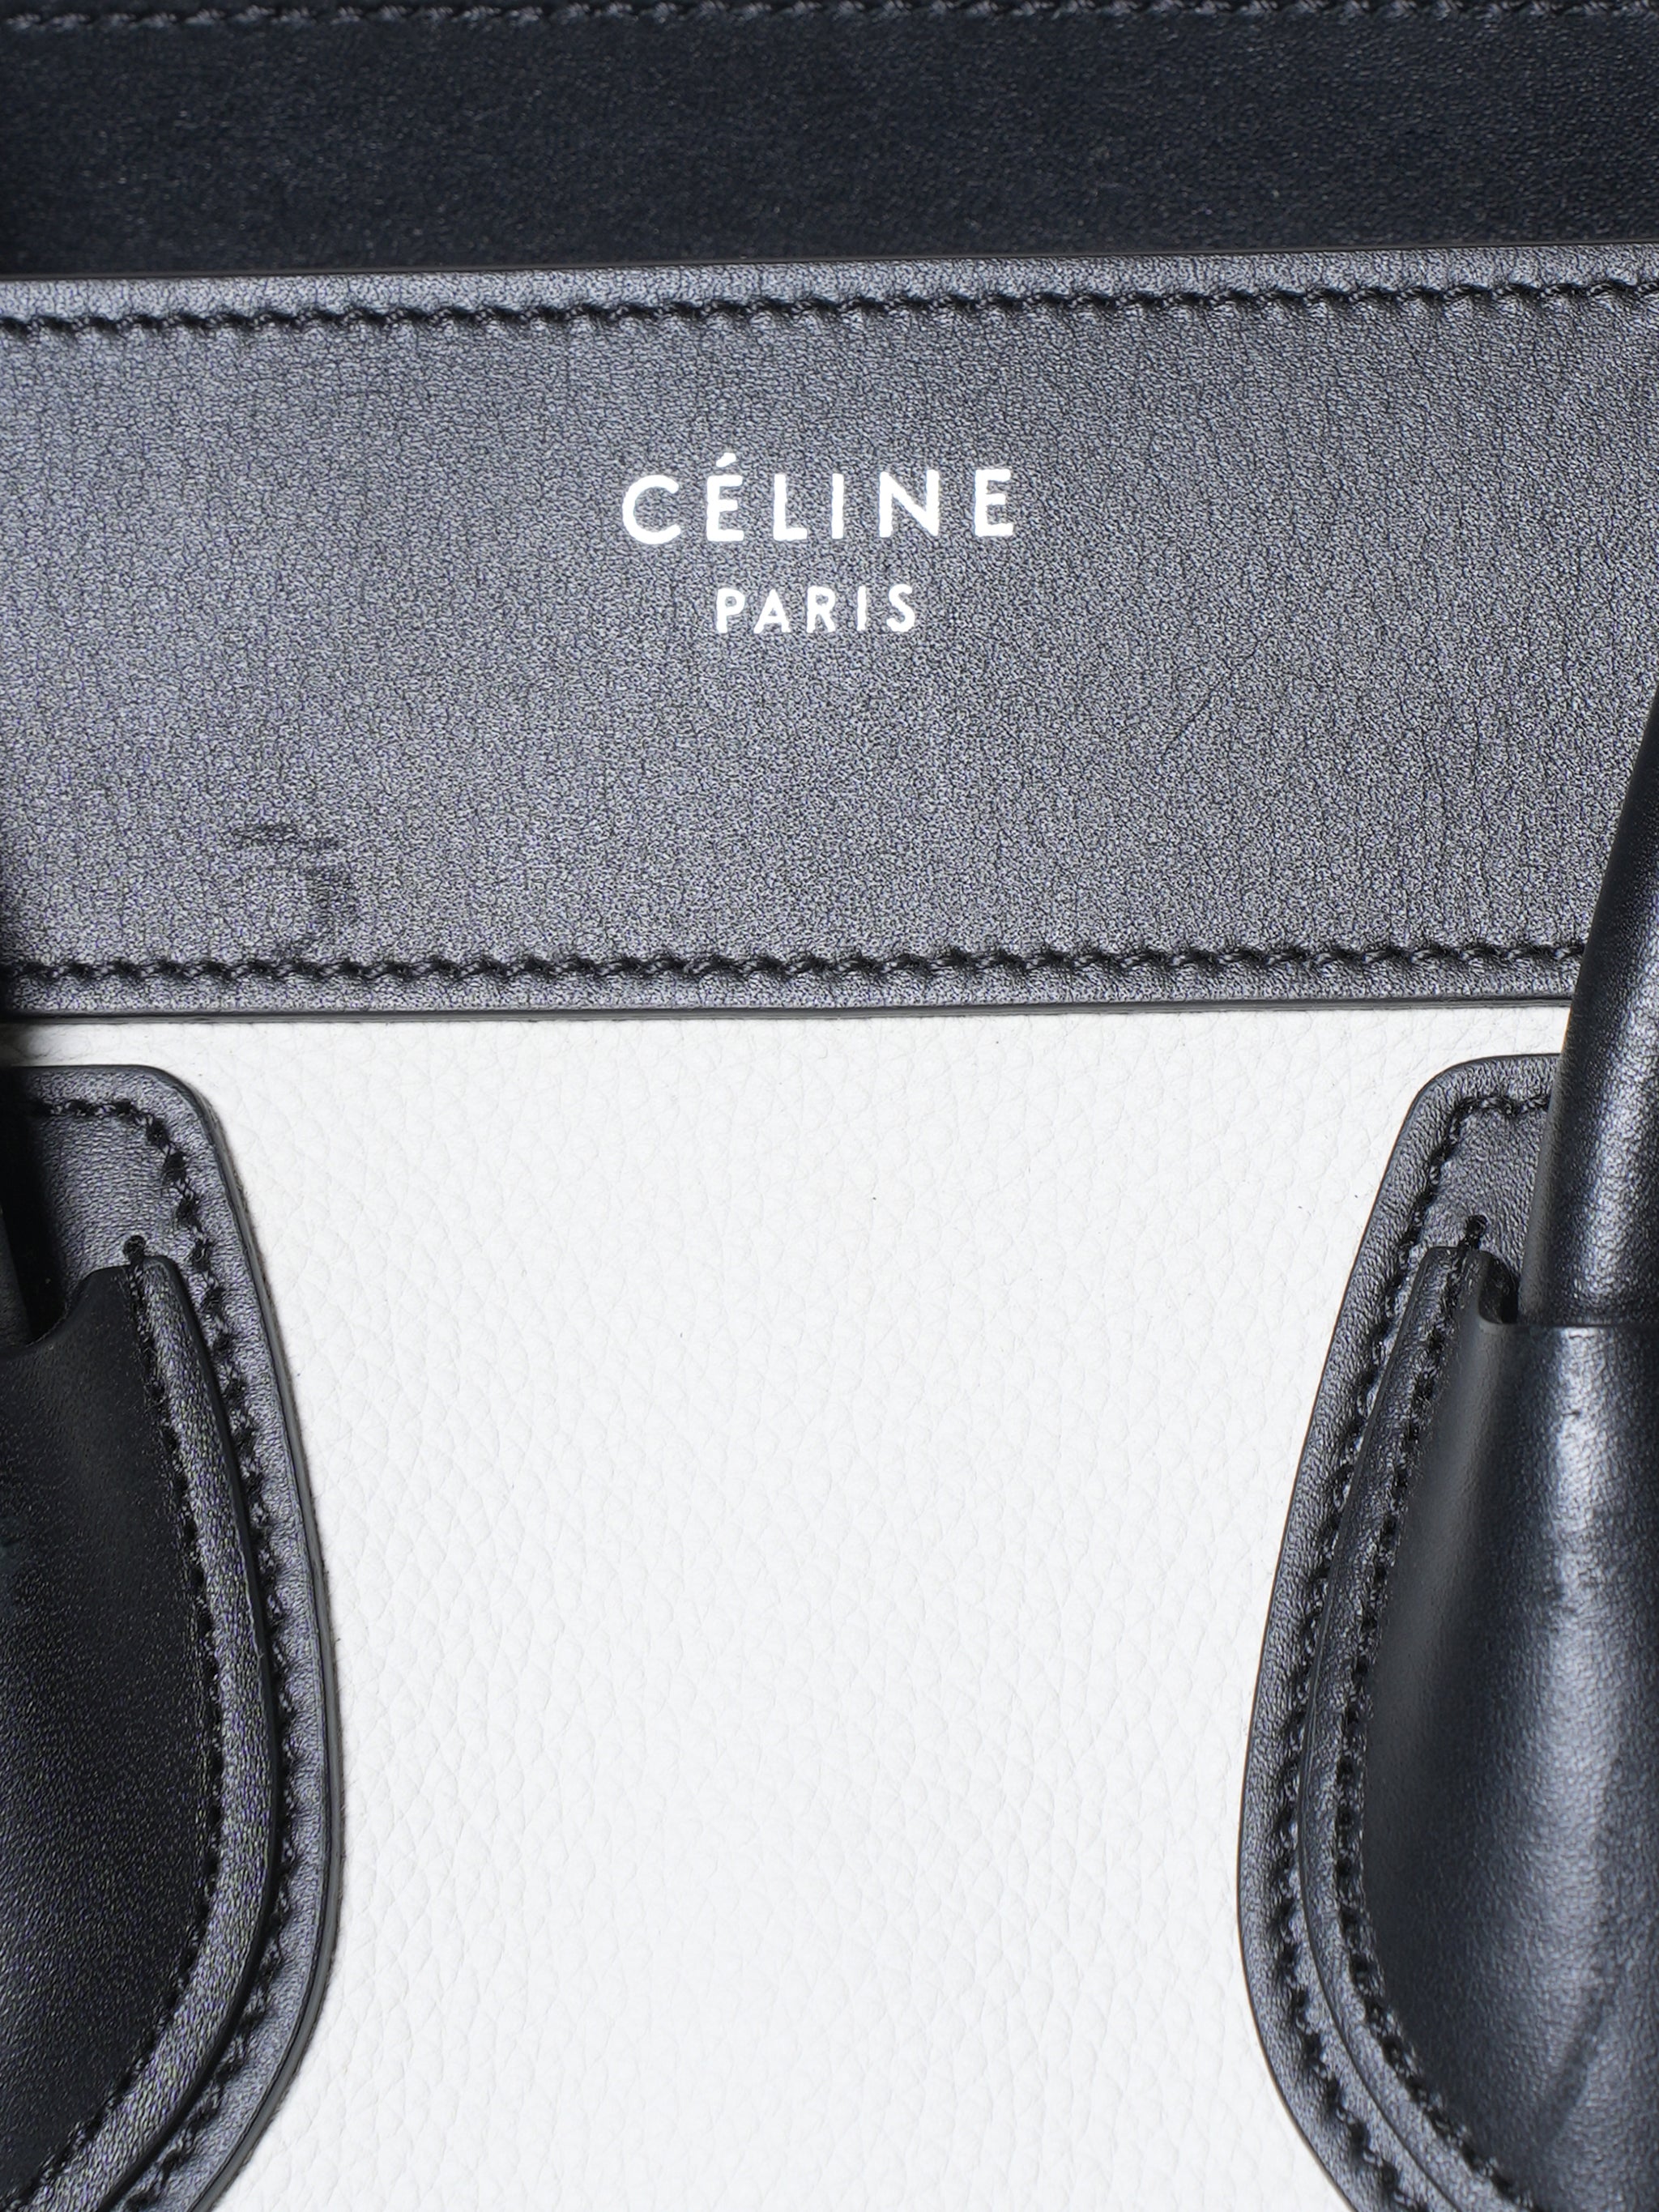 Celine Luggage Bag Review - FROM LUXE WITH LOVE